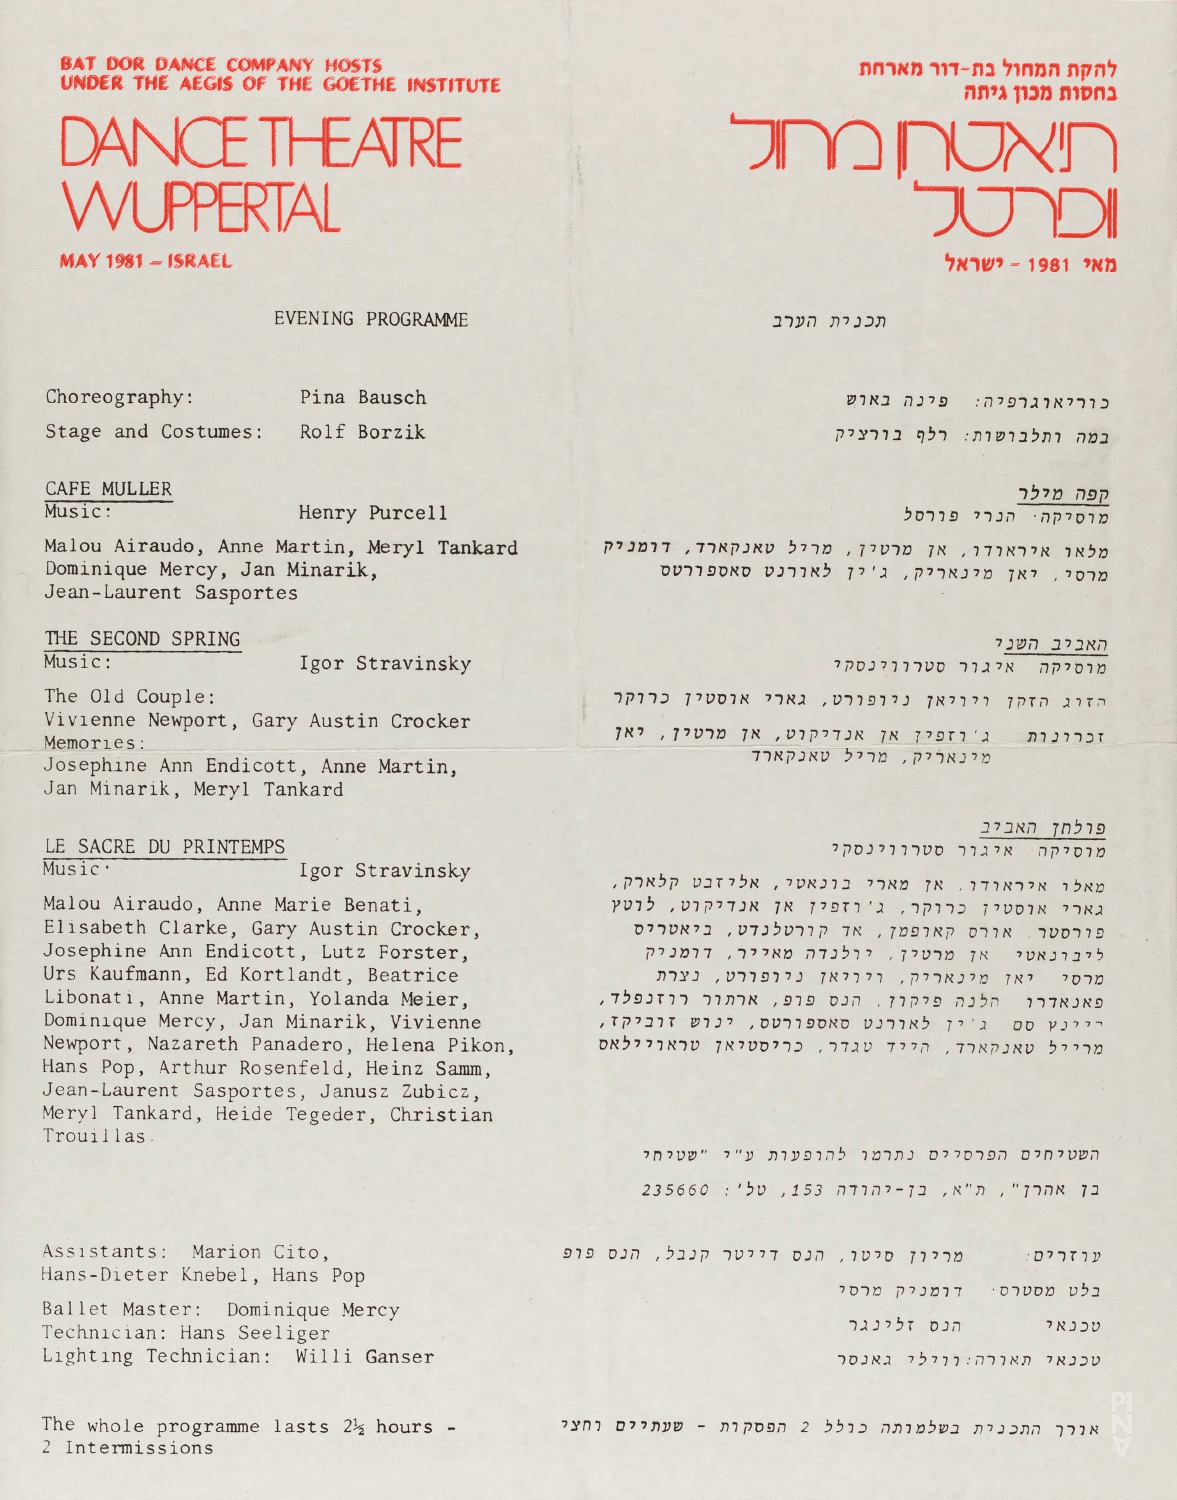 Evening leaflet for “Café Müller”, “The Second Spring” and “The Rite of Spring” by Pina Bausch with Tanztheater Wuppertal in in Ein HaShofet, Haifa, Jerusalem and Tel Aviv, 05/12/1981 – 05/22/1981